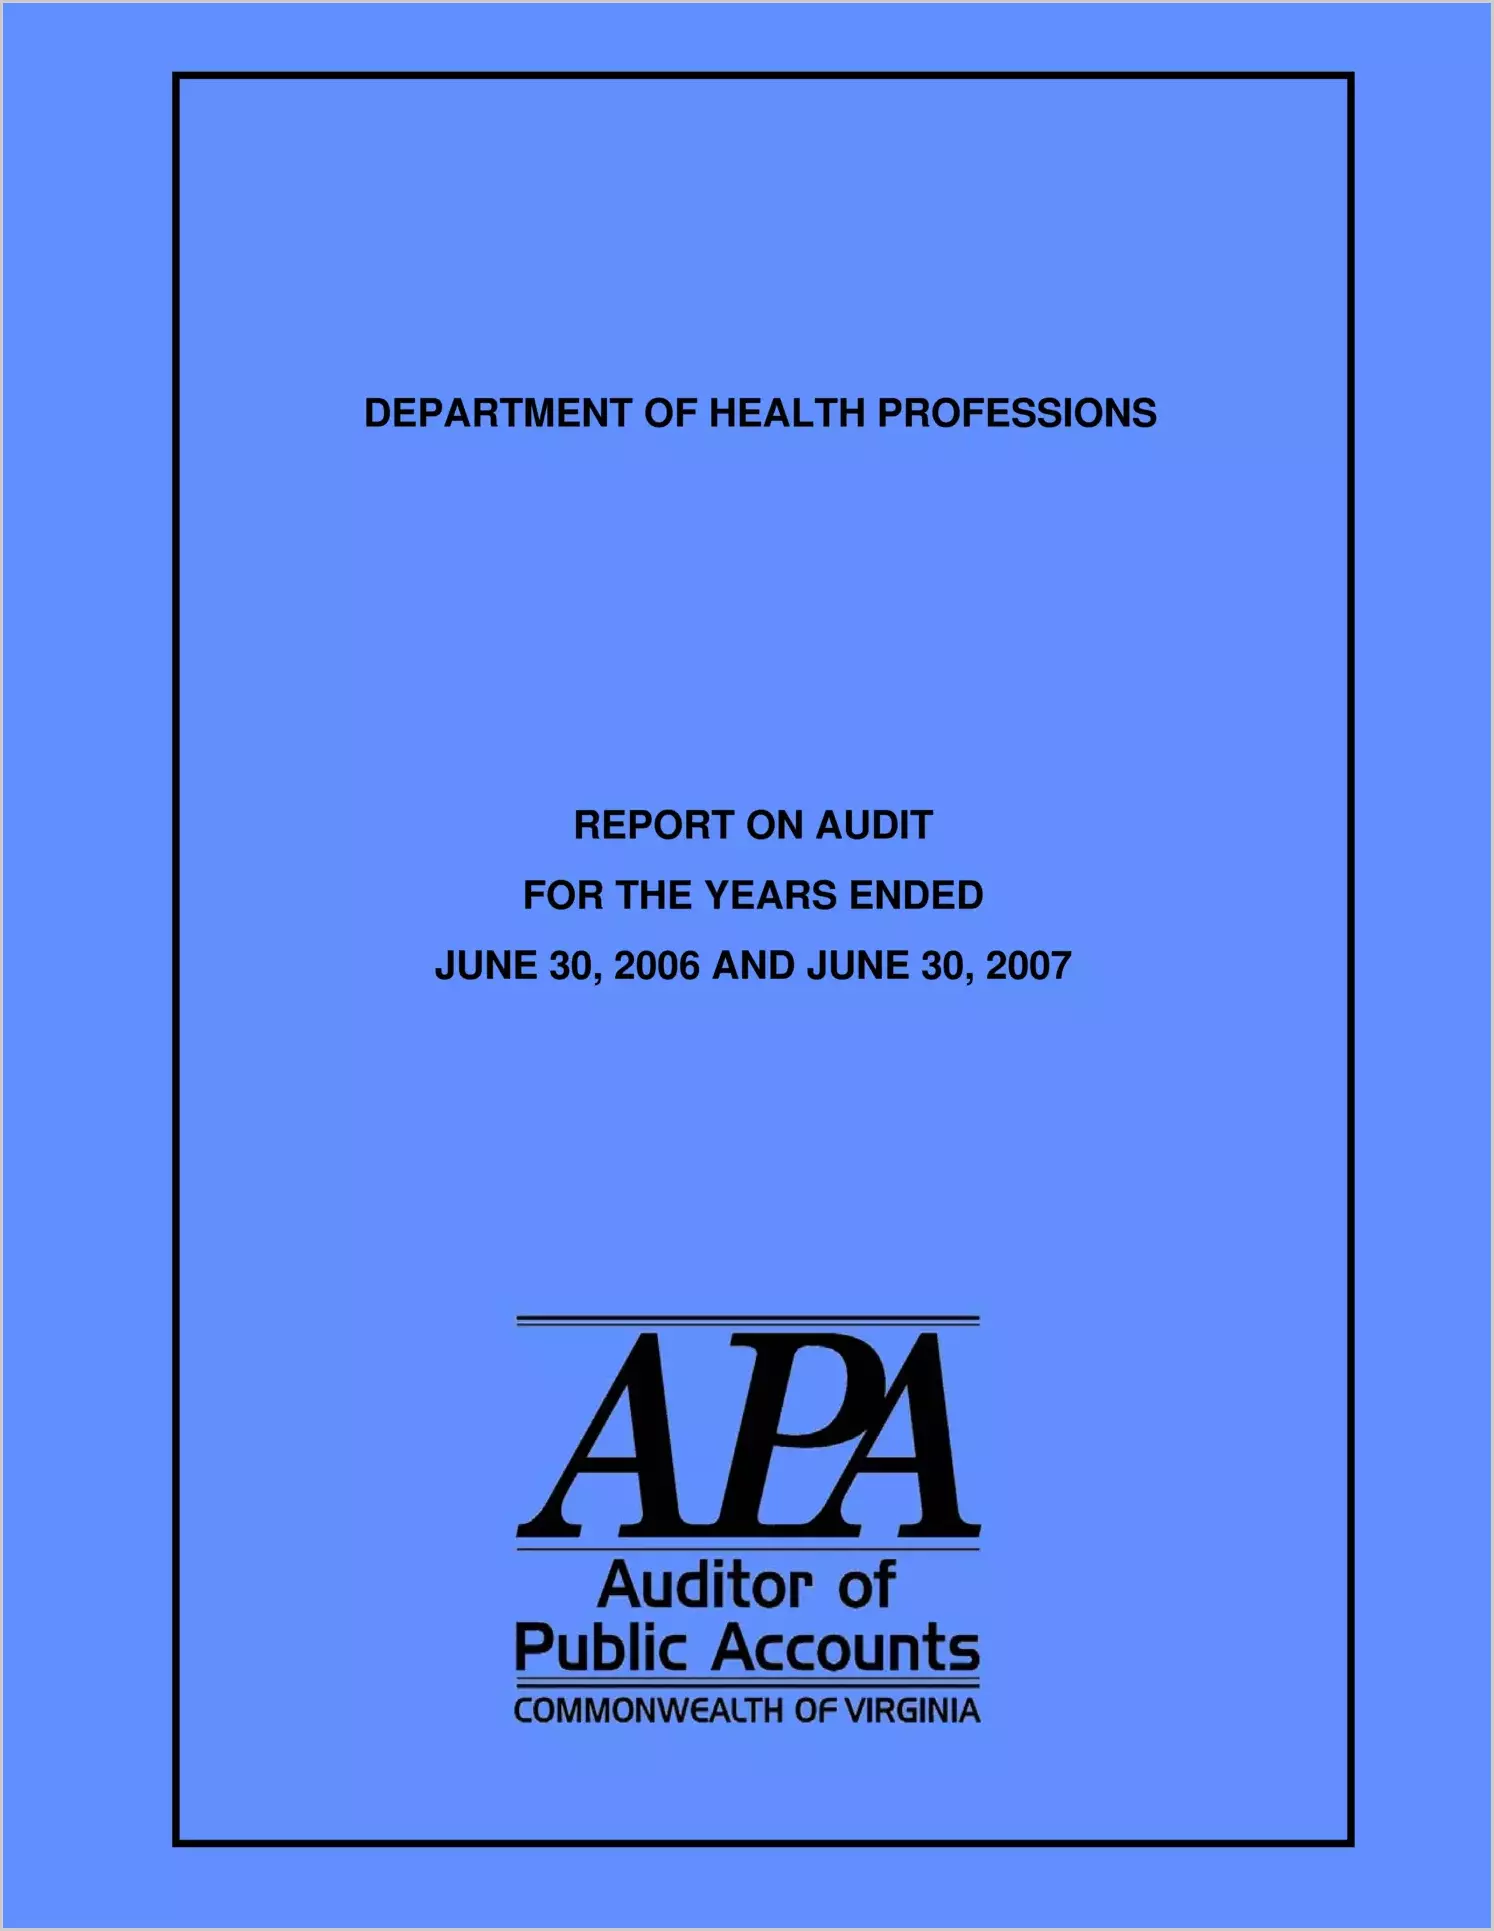 Department of Health Professions report on Audit for the years ended June 30, 2006 and June 30, 2007